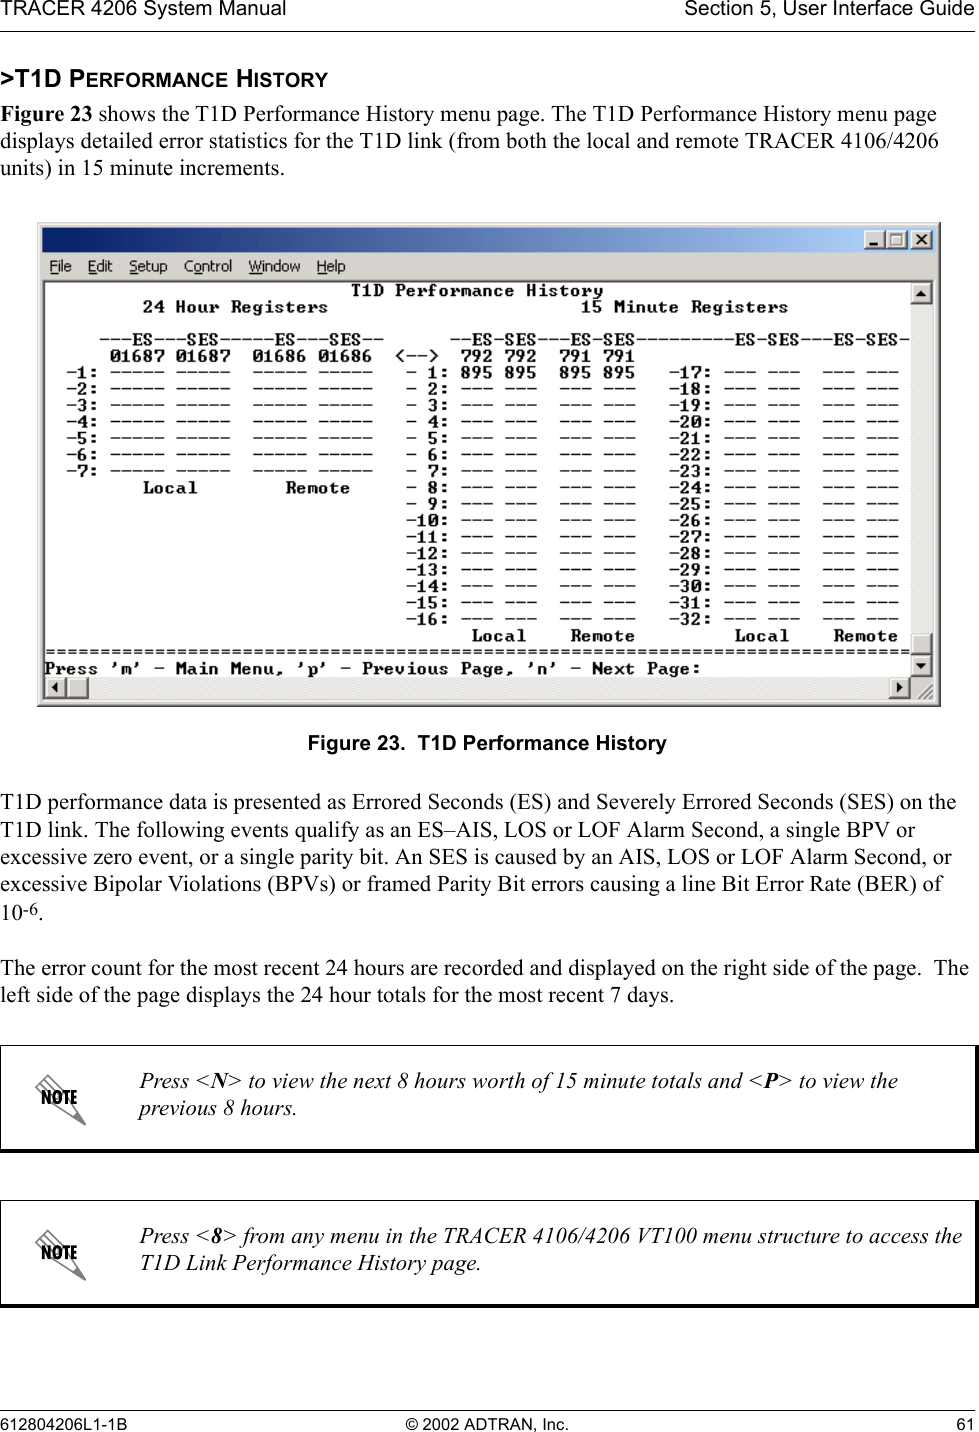 TRACER 4206 System Manual Section 5, User Interface Guide612804206L1-1B © 2002 ADTRAN, Inc. 61&gt;T1D PERFORMANCE HISTORYFigure 23 shows the T1D Performance History menu page. The T1D Performance History menu page displays detailed error statistics for the T1D link (from both the local and remote TRACER 4106/4206 units) in 15 minute increments. Figure 23.  T1D Performance HistoryT1D performance data is presented as Errored Seconds (ES) and Severely Errored Seconds (SES) on the T1D link. The following events qualify as an ES–AIS, LOS or LOF Alarm Second, a single BPV or excessive zero event, or a single parity bit. An SES is caused by an AIS, LOS or LOF Alarm Second, or excessive Bipolar Violations (BPVs) or framed Parity Bit errors causing a line Bit Error Rate (BER) of 10-6.The error count for the most recent 24 hours are recorded and displayed on the right side of the page.  The left side of the page displays the 24 hour totals for the most recent 7 days.Press &lt;N&gt; to view the next 8 hours worth of 15 minute totals and &lt;P&gt; to view the previous 8 hours.Press &lt;8&gt; from any menu in the TRACER 4106/4206 VT100 menu structure to access the T1D Link Performance History page.